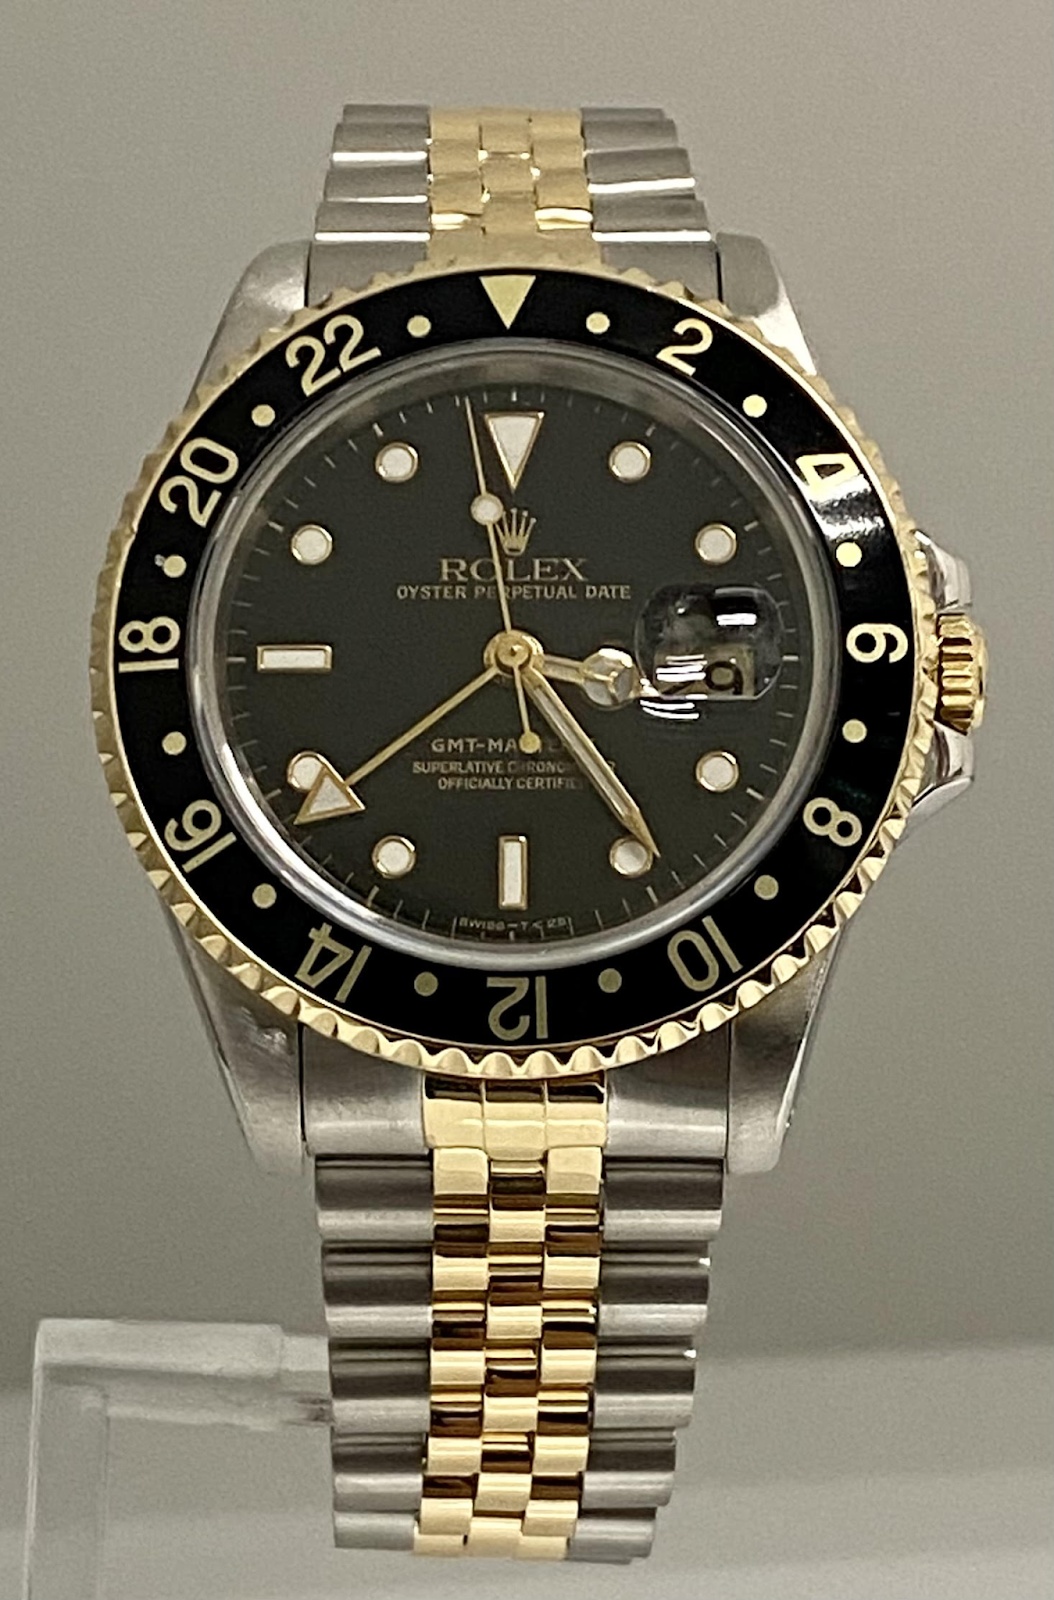 Rolex ref 16713 Overhaul and Detail at G&S